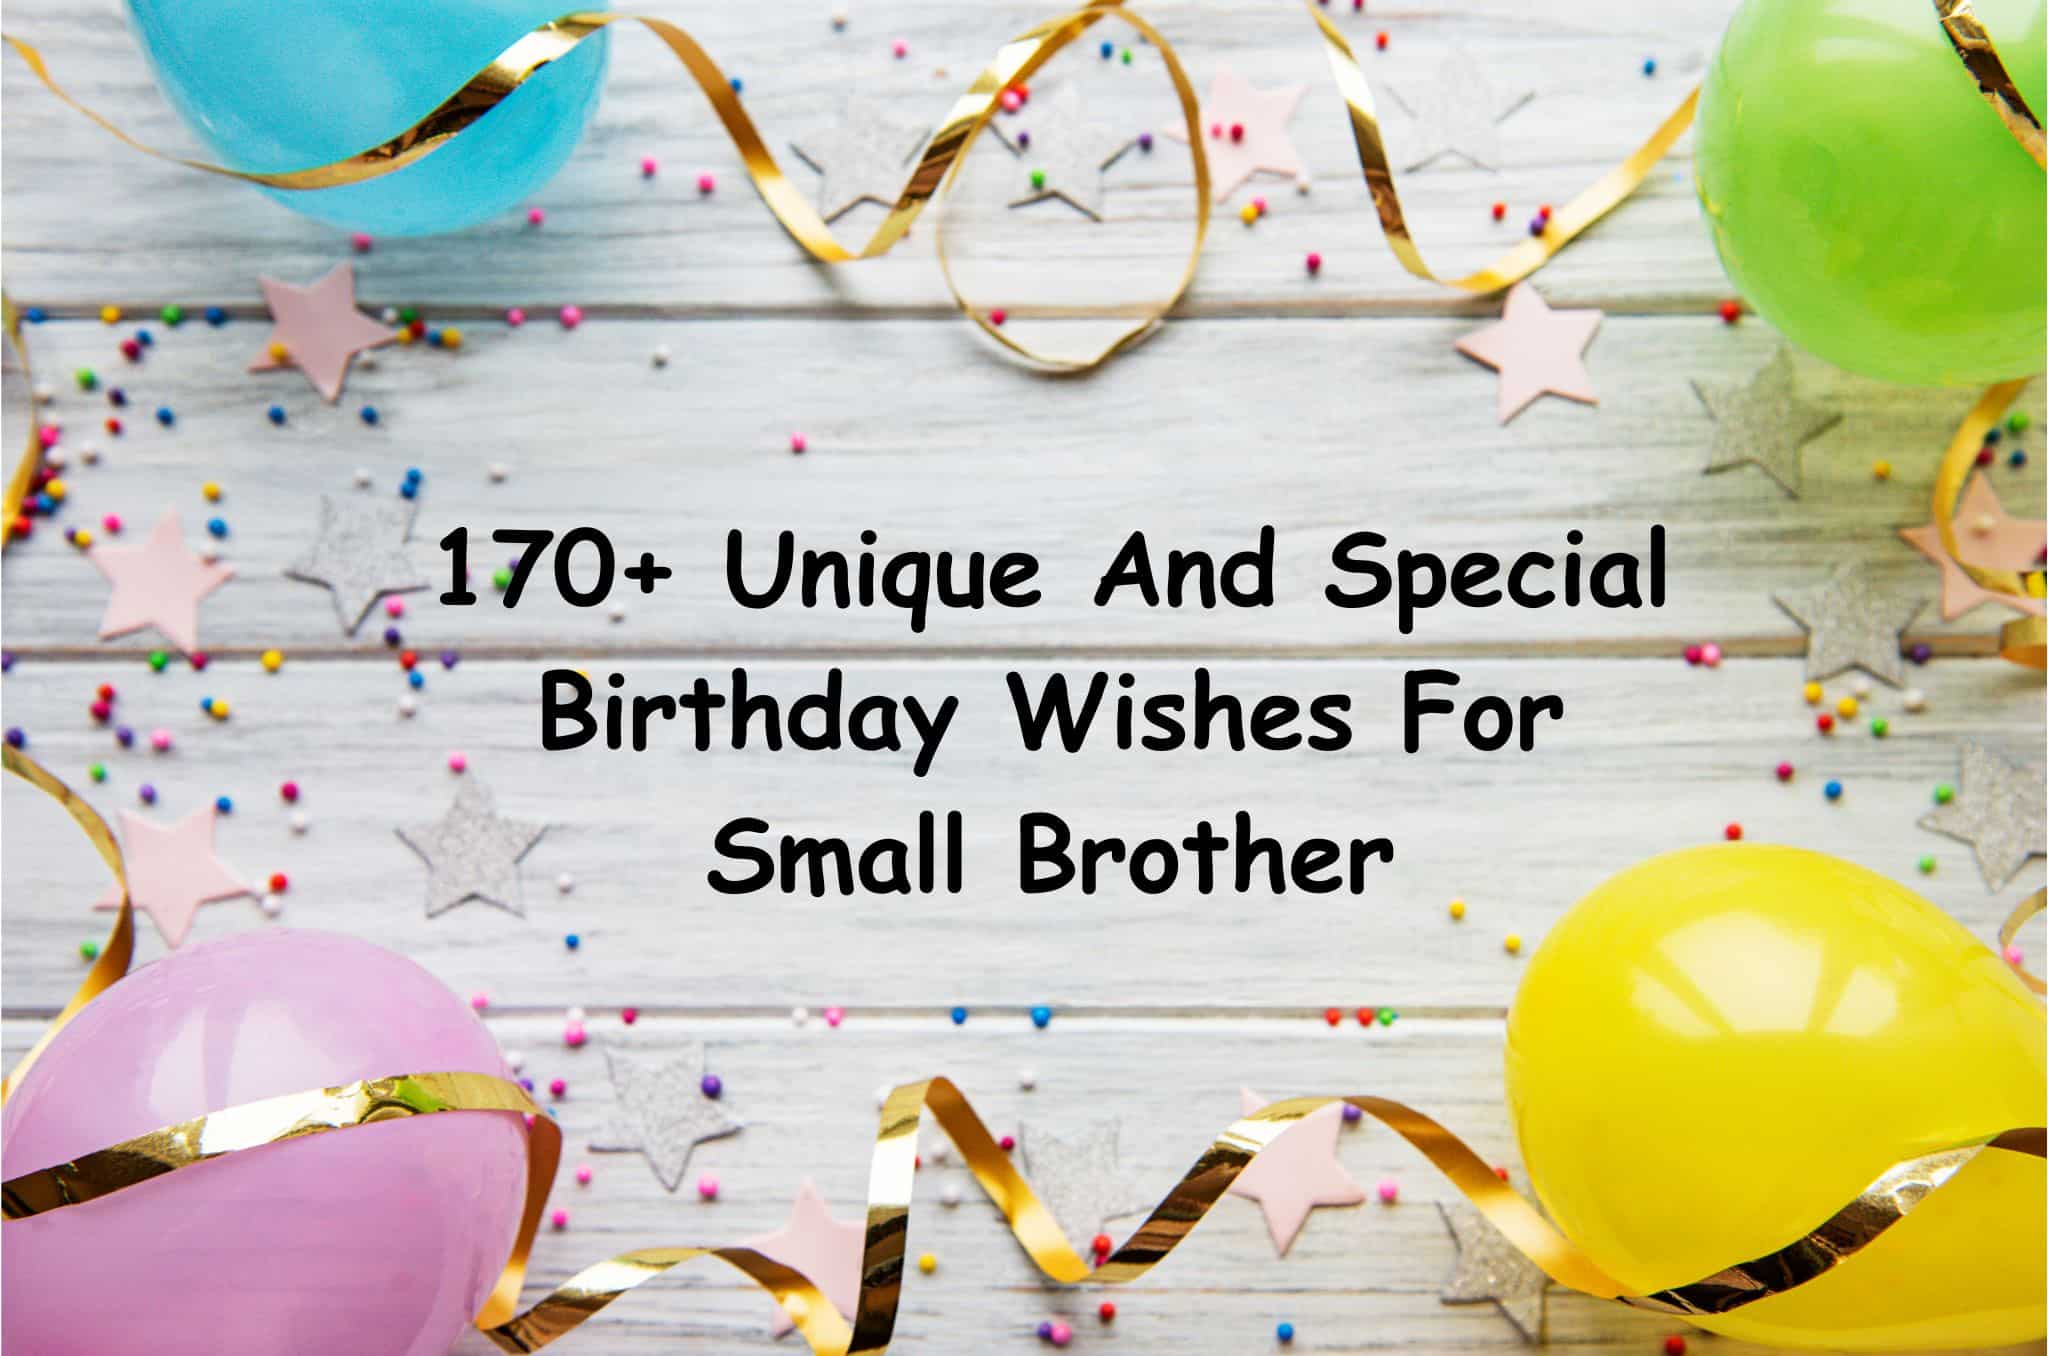 170+ unique and special birthday wishes for small brother